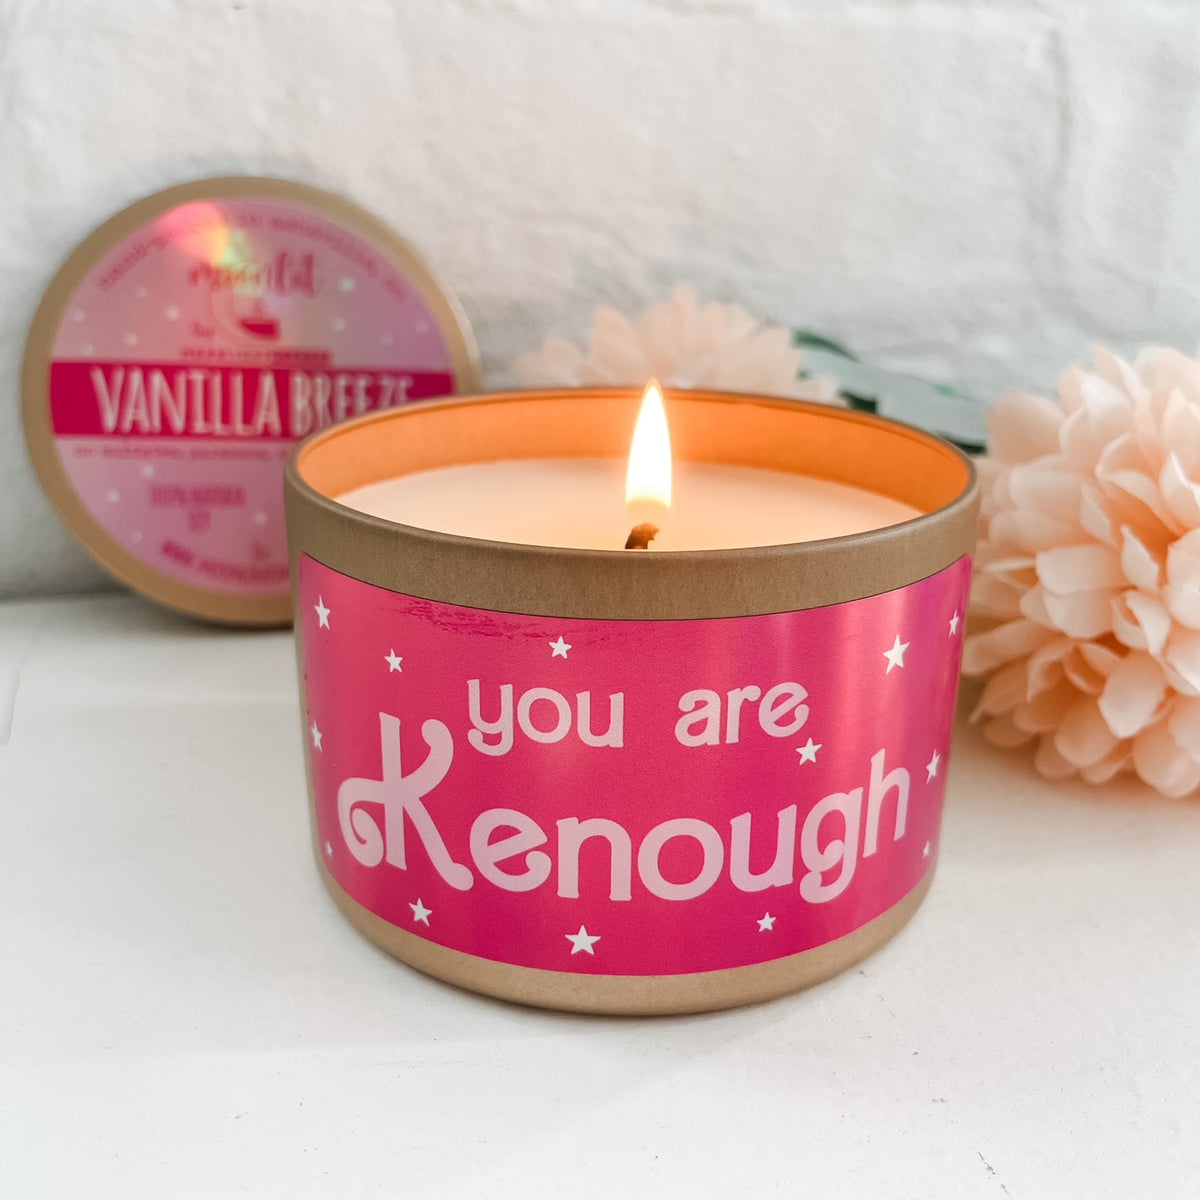 Vanilla Soy was Candle | Luxury Candle Soy Wax Vanilla Blend | Unique Gift  Candles (Pink)